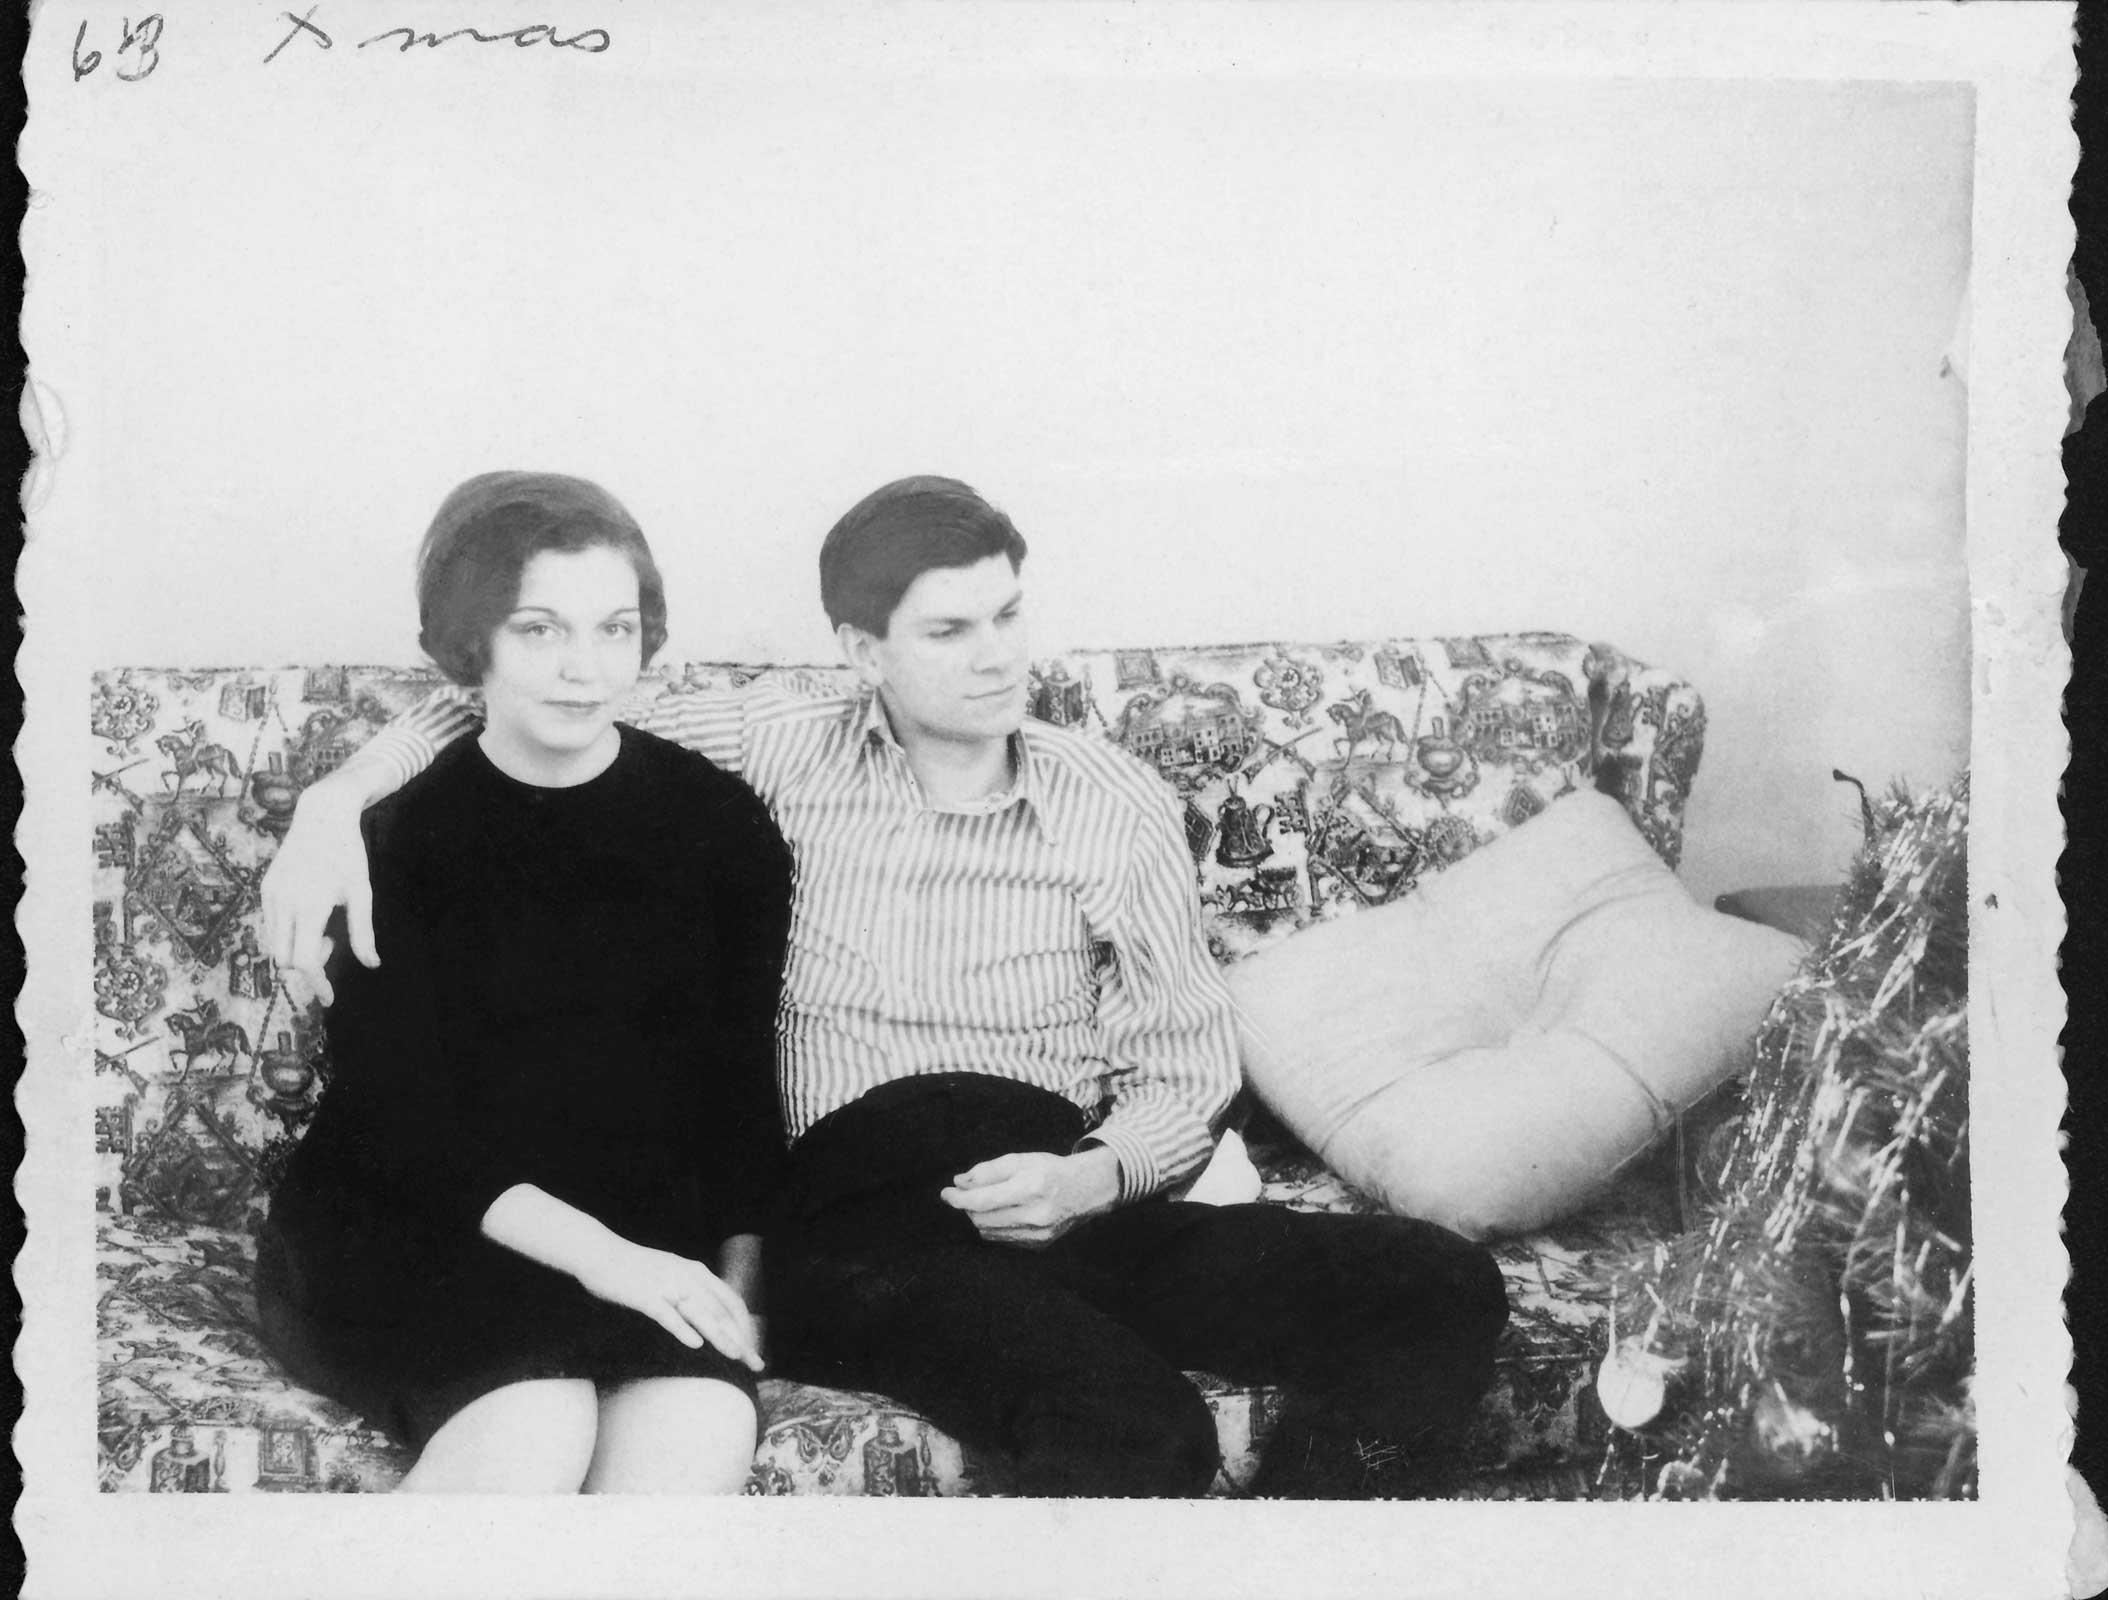 black and white photograph of a man and woman sitting on floral pattern sofa. Man has his arm around the woman and she is looking at the camera.